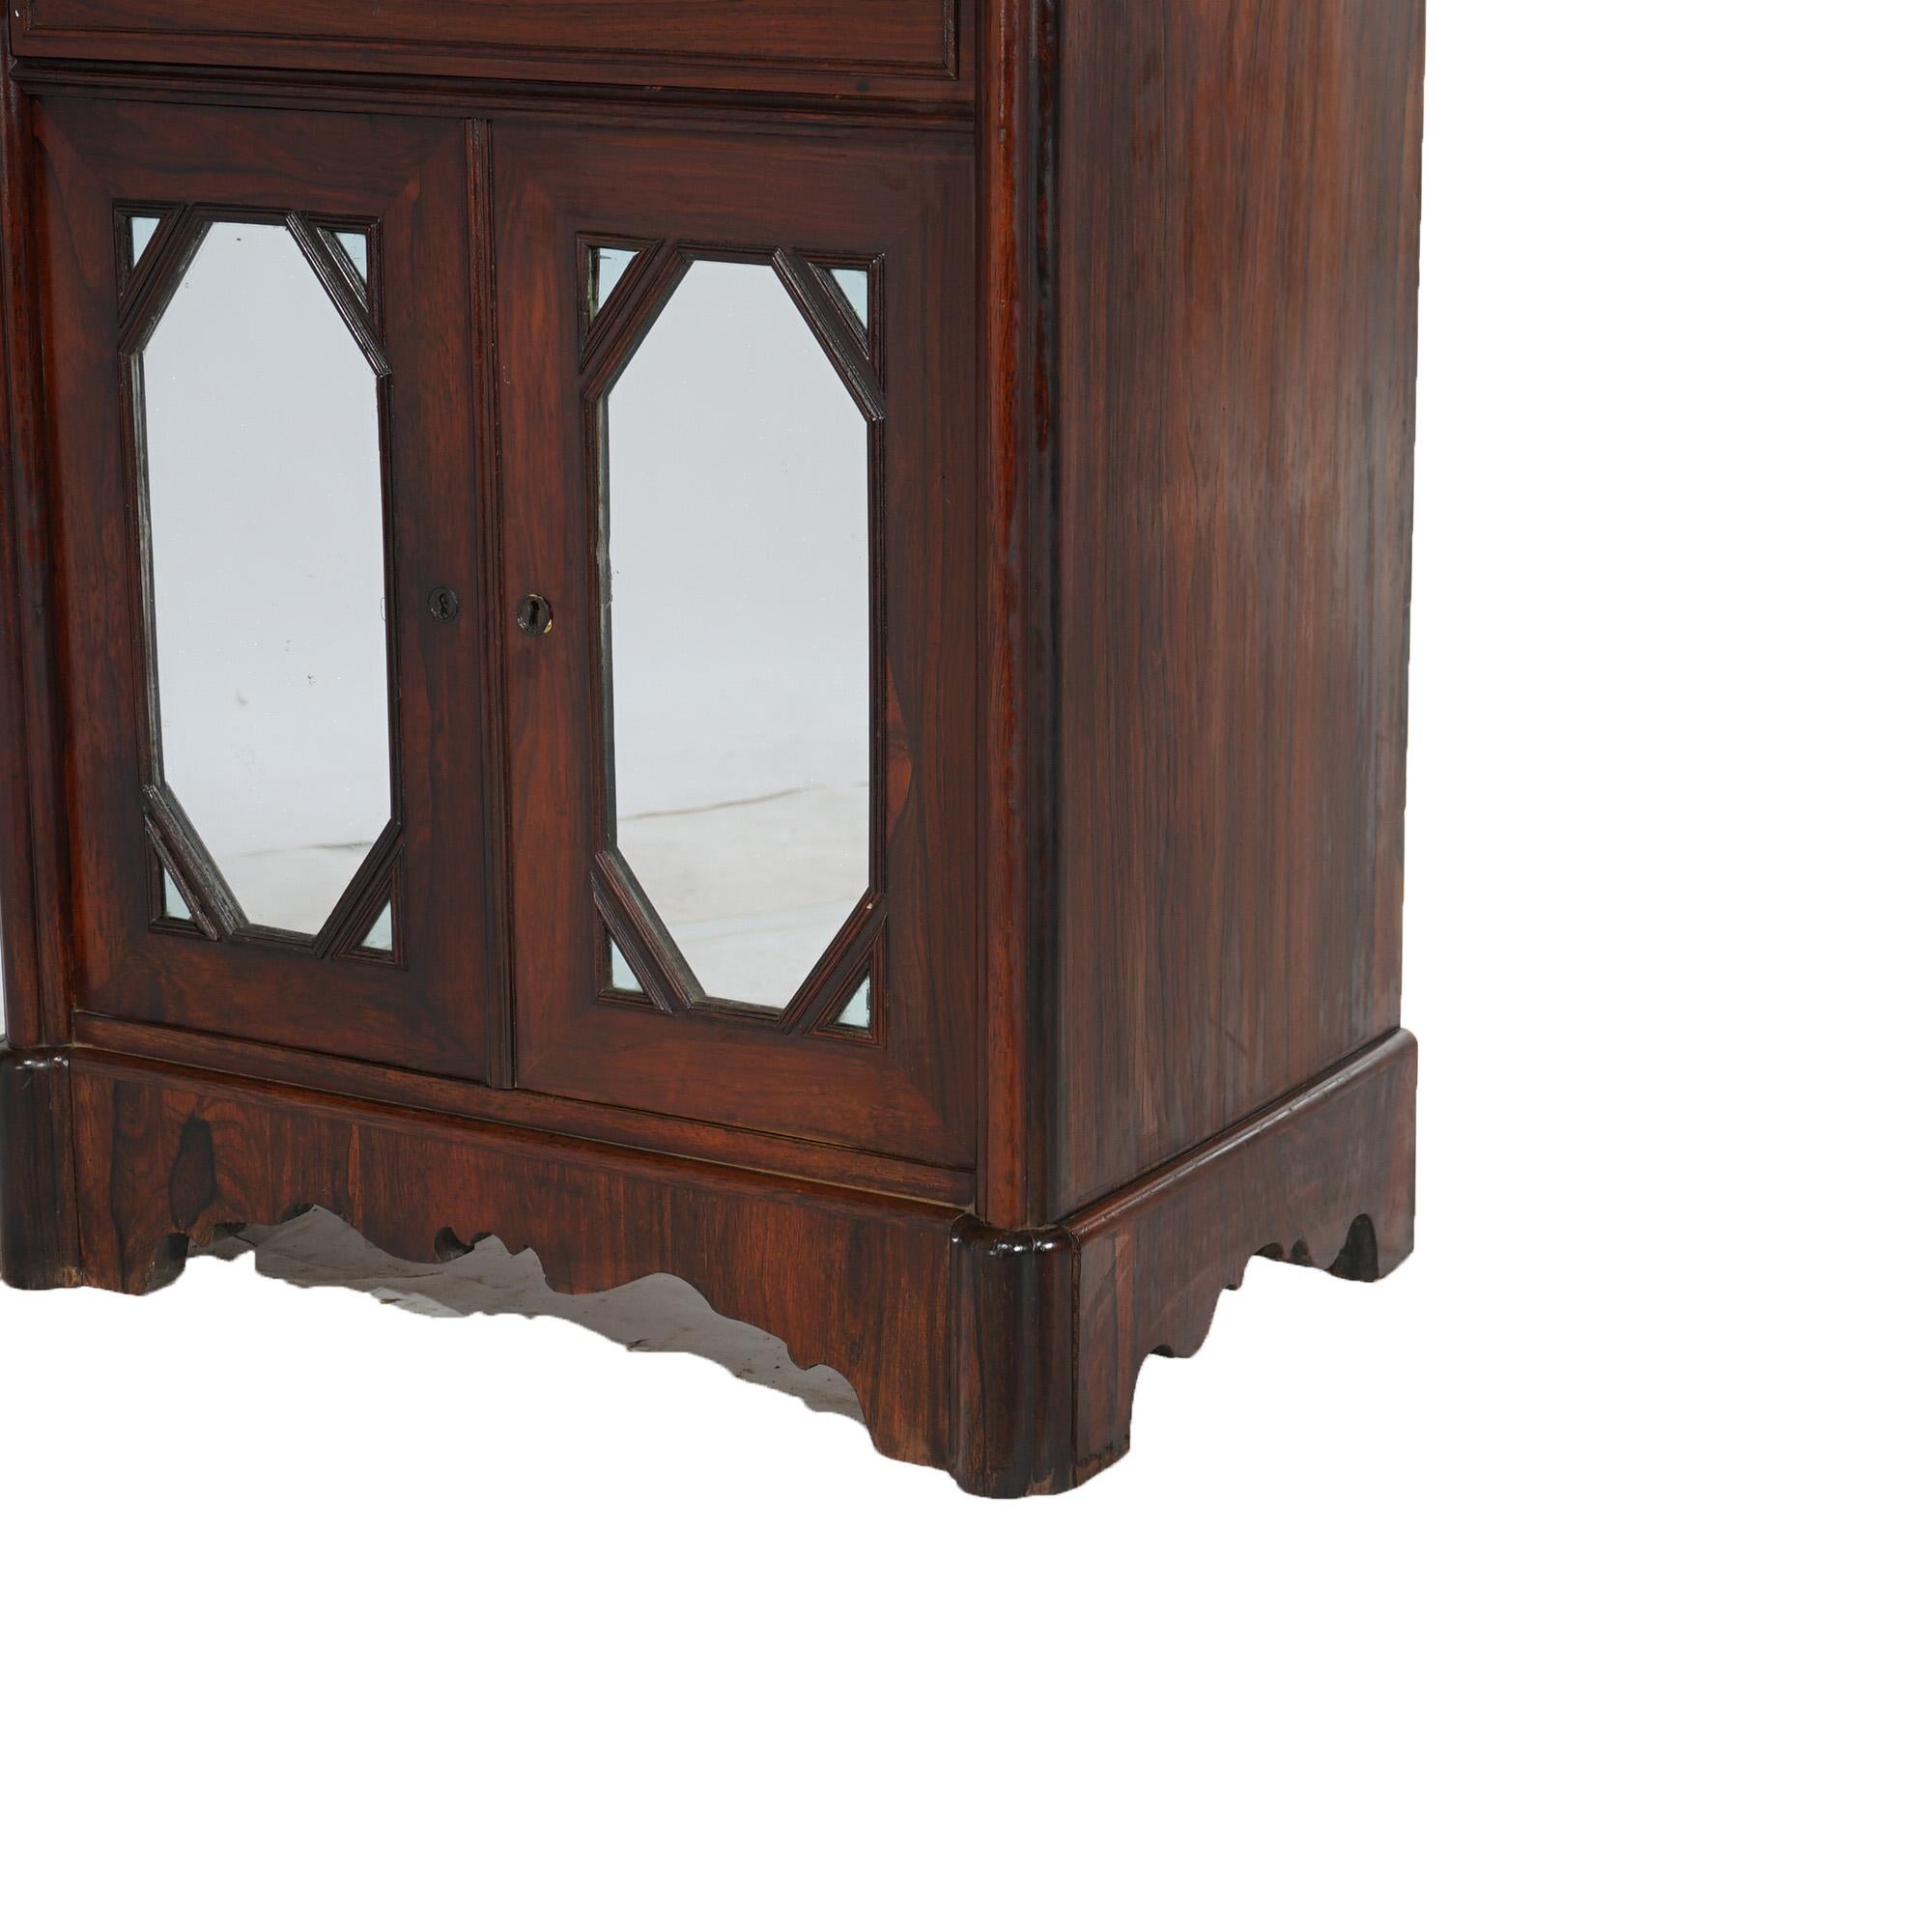 Antique Gothic Revival Victorian Rosewood & Marble Mirrored Secretary Desk C1850 For Sale 9